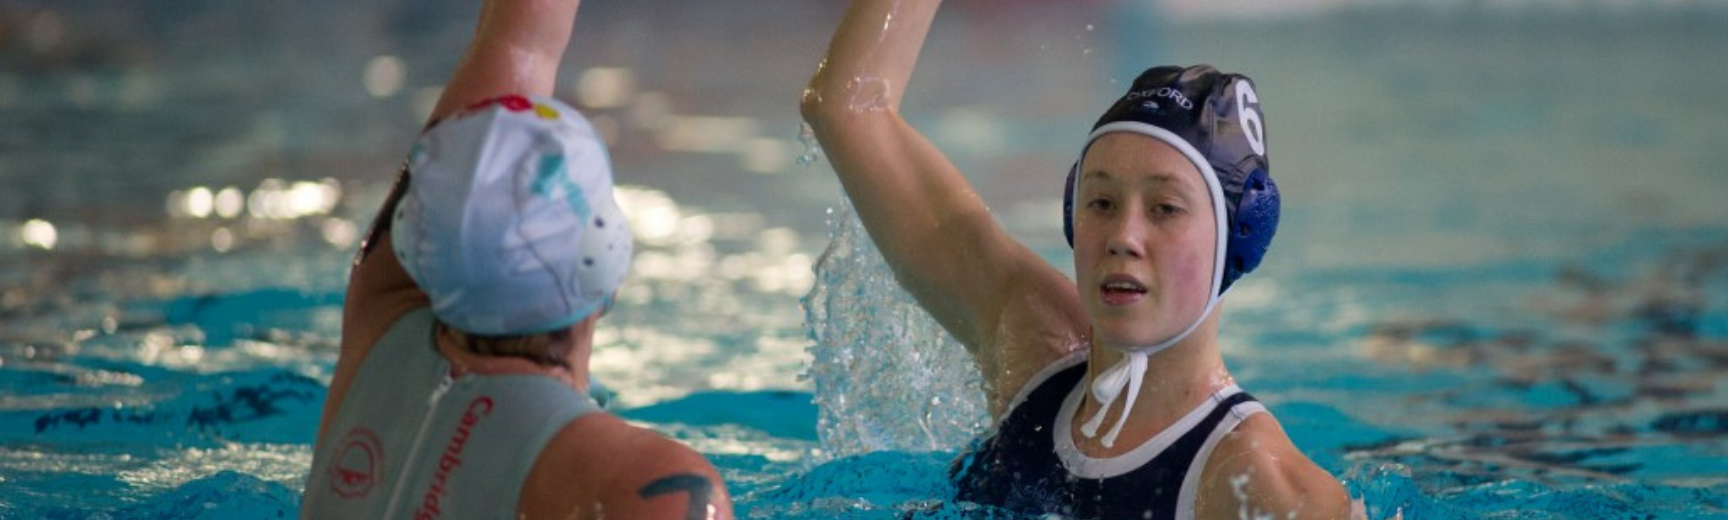 Two women playing water polo in the Oxford vs Cambridge Varsity match